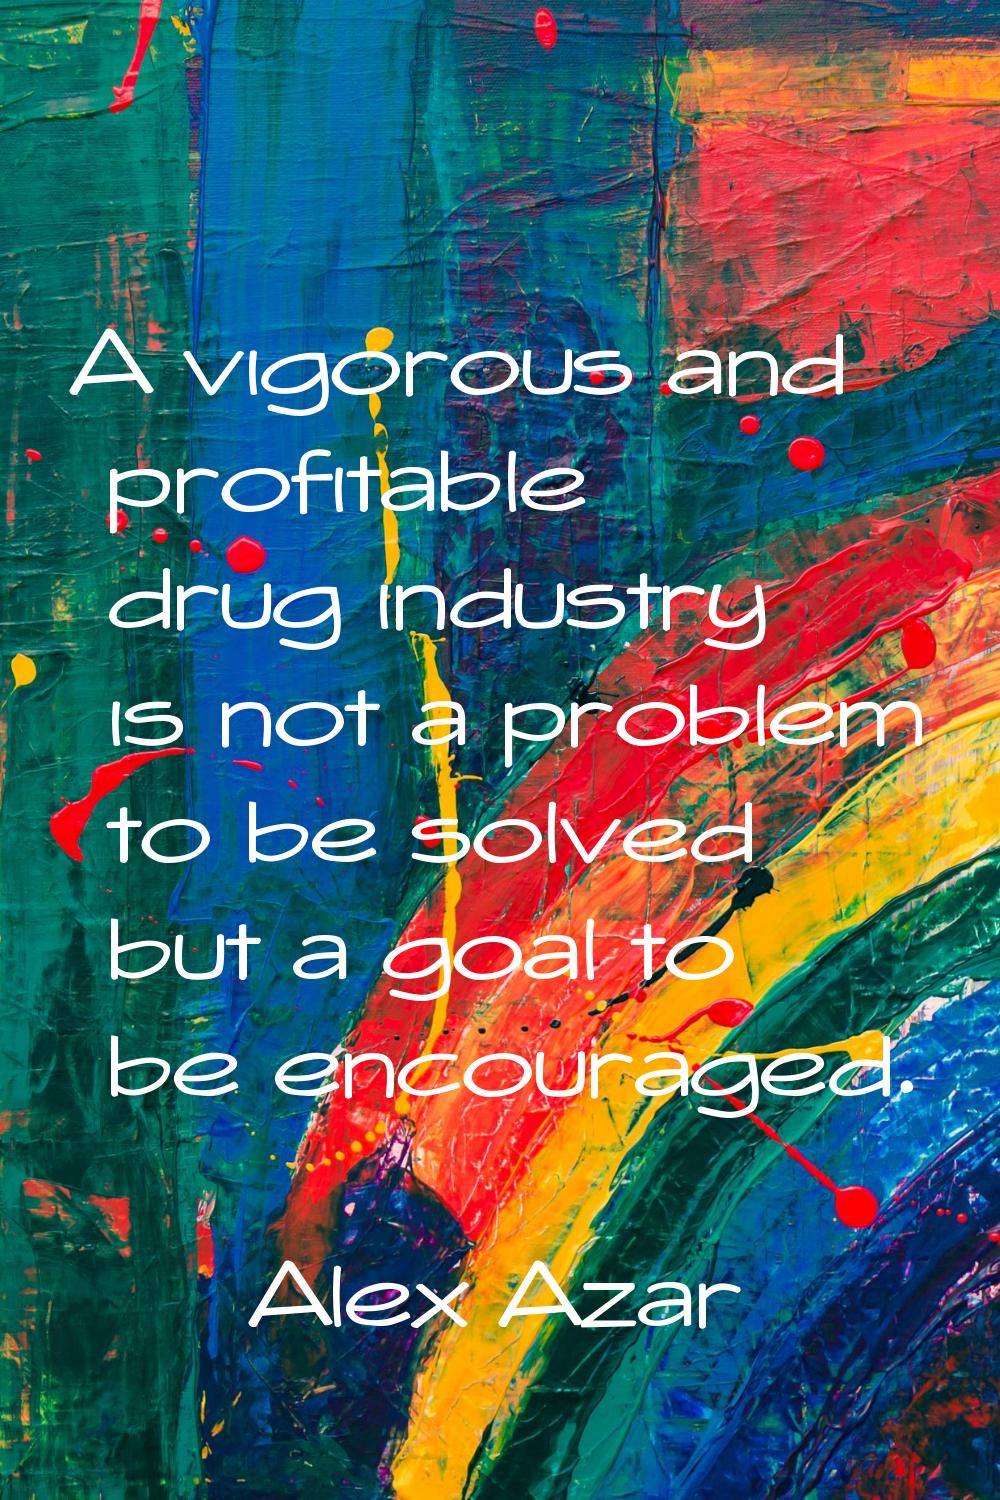 A vigorous and profitable drug industry is not a problem to be solved but a goal to be encouraged.